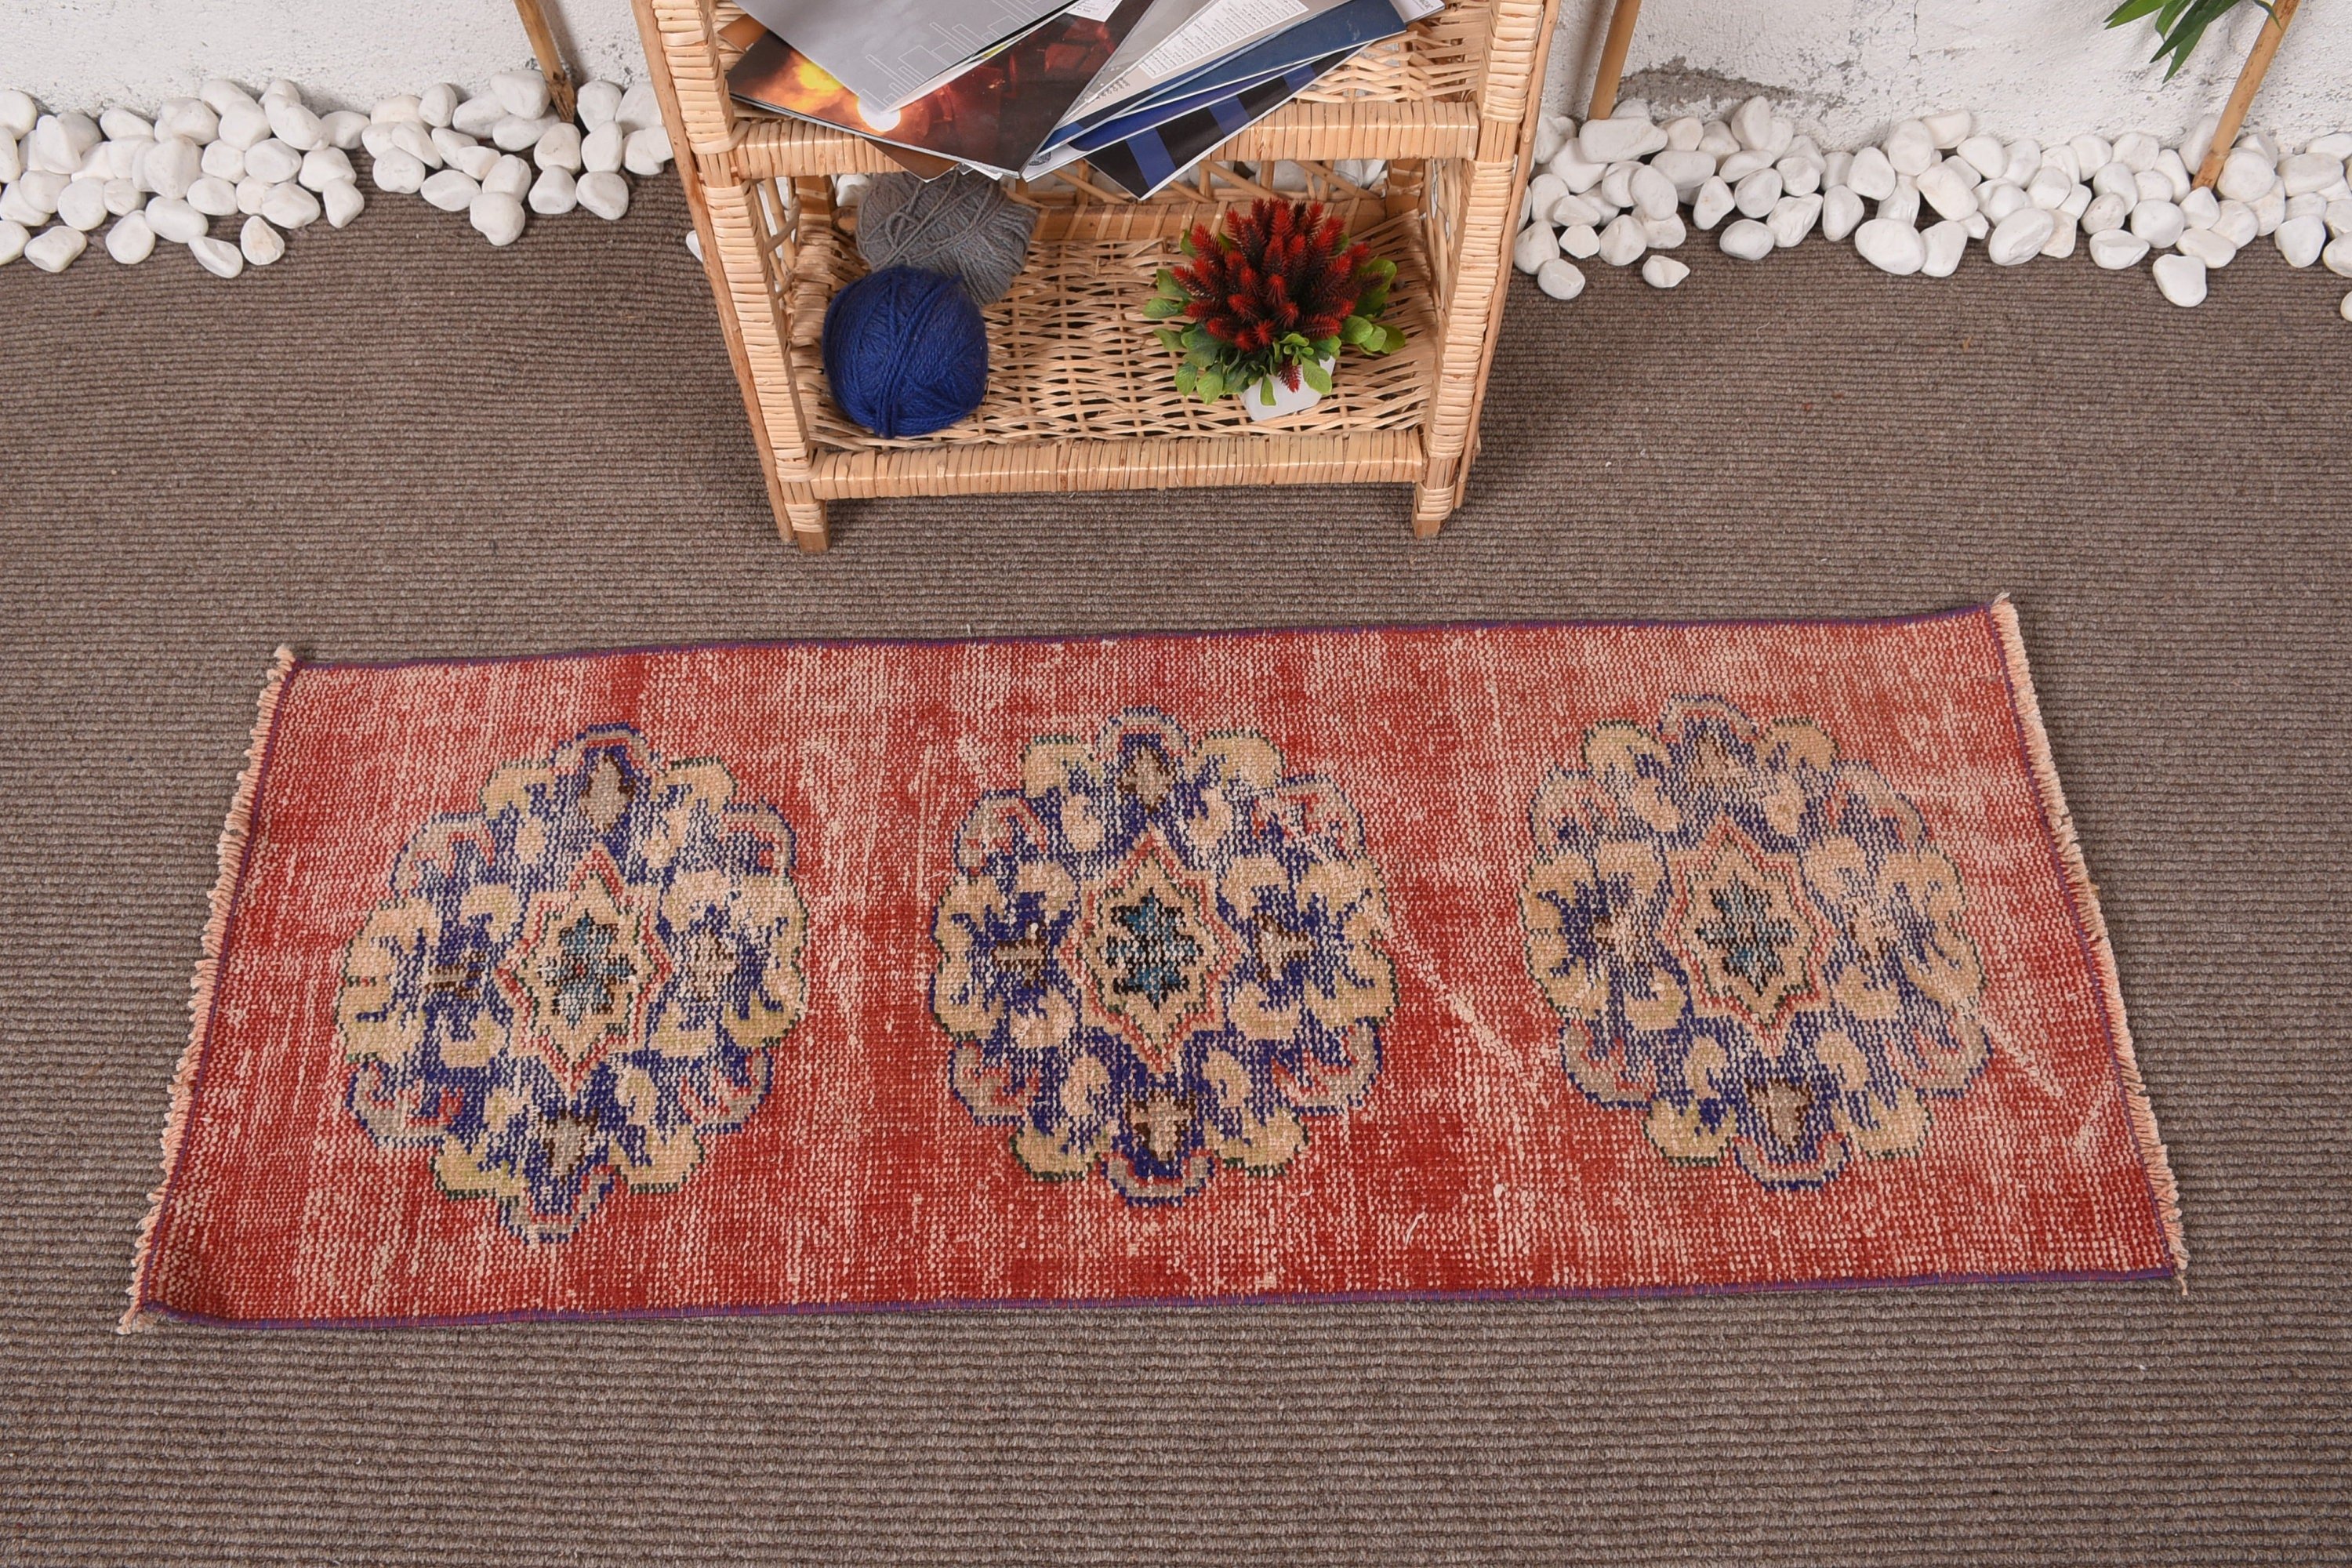 Anatolian Rug, Bedroom Rug, 1.6x4.2 ft Small Rugs, Rugs for Kitchen, Car Mat Rug, Red Antique Rugs, Vintage Rug, Turkish Rug